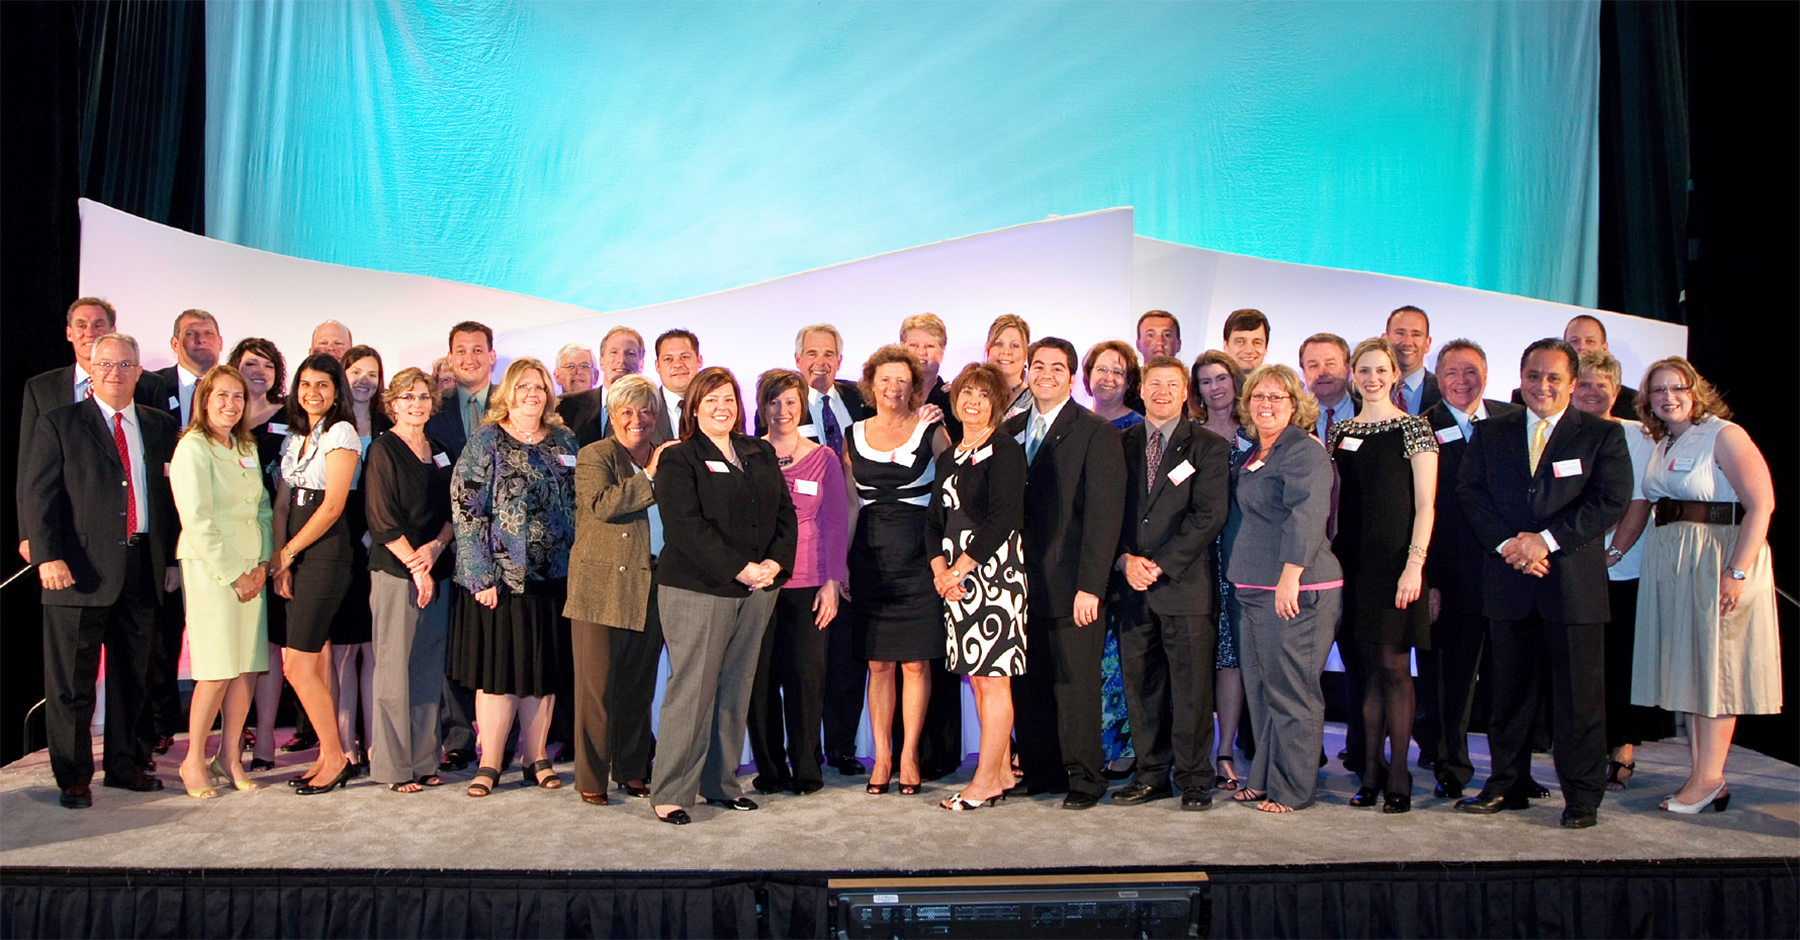 Group picture of Illinois Mutual employees celebrating the Company’s 100th anniversary.